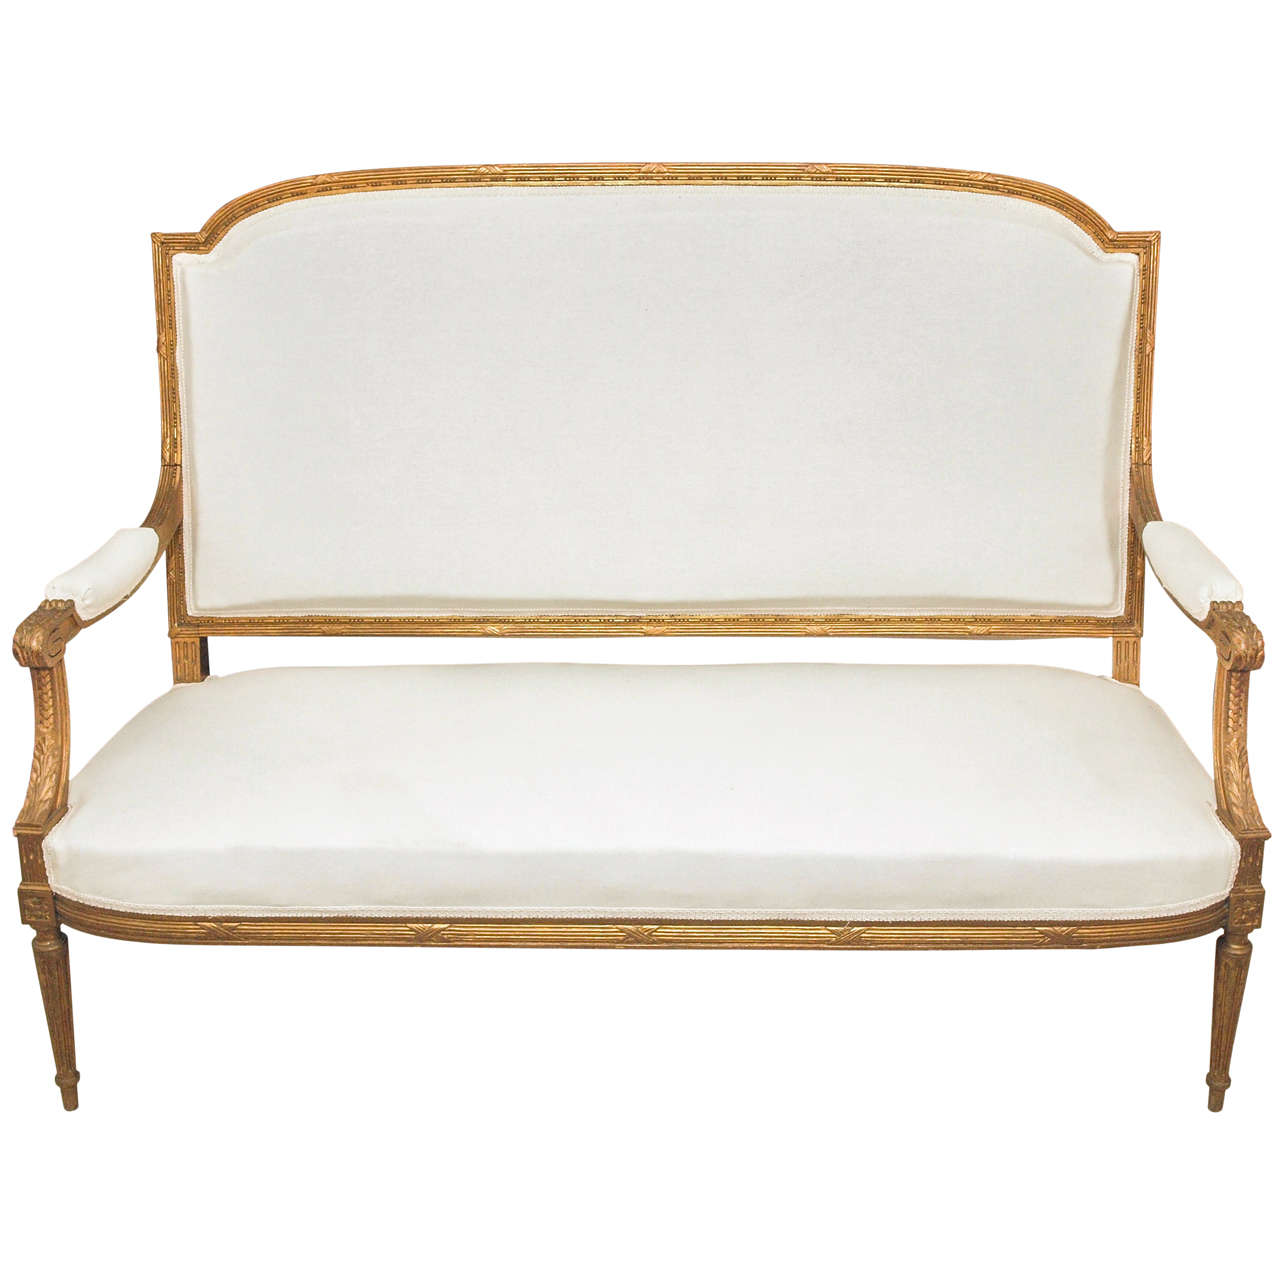 Late 19th C. French Louis XVI-Style Settee